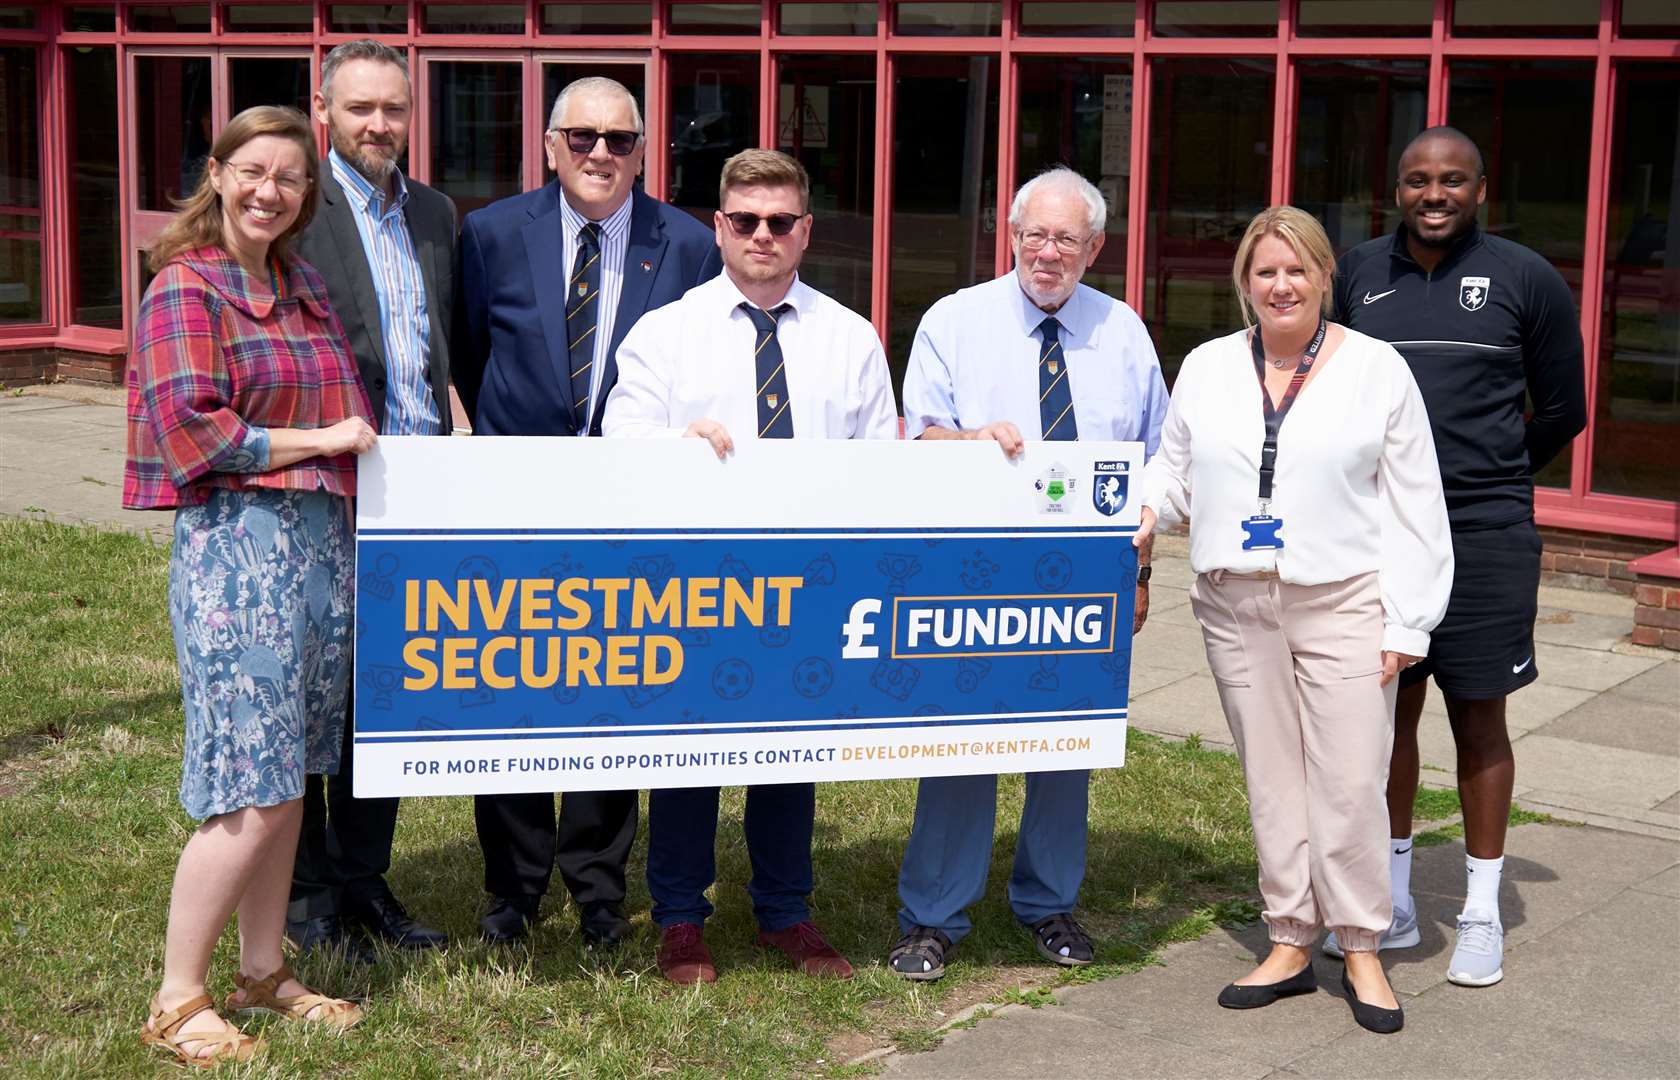 A funding application to the Football Foundation from the North Kent Sunday Football League in partnership with Gravesham Borough Council with support from the Kent FA has been successful